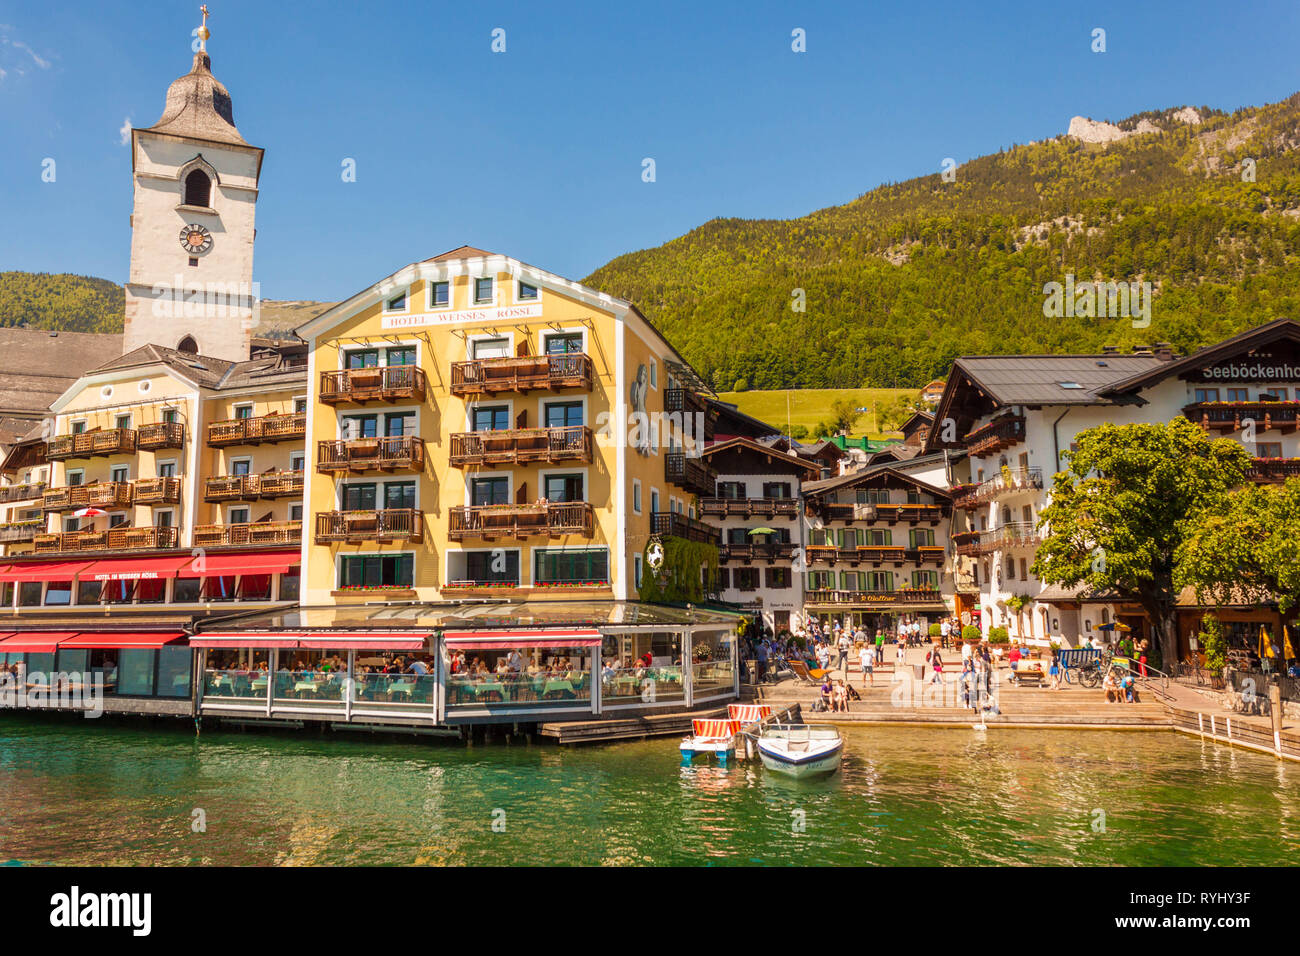 St.Wolfgang, Austria - May 27, 2017: Lakeside sqaure and restaurants of popular austrian town are full of people. Famous White Horse Inn Stock Photo